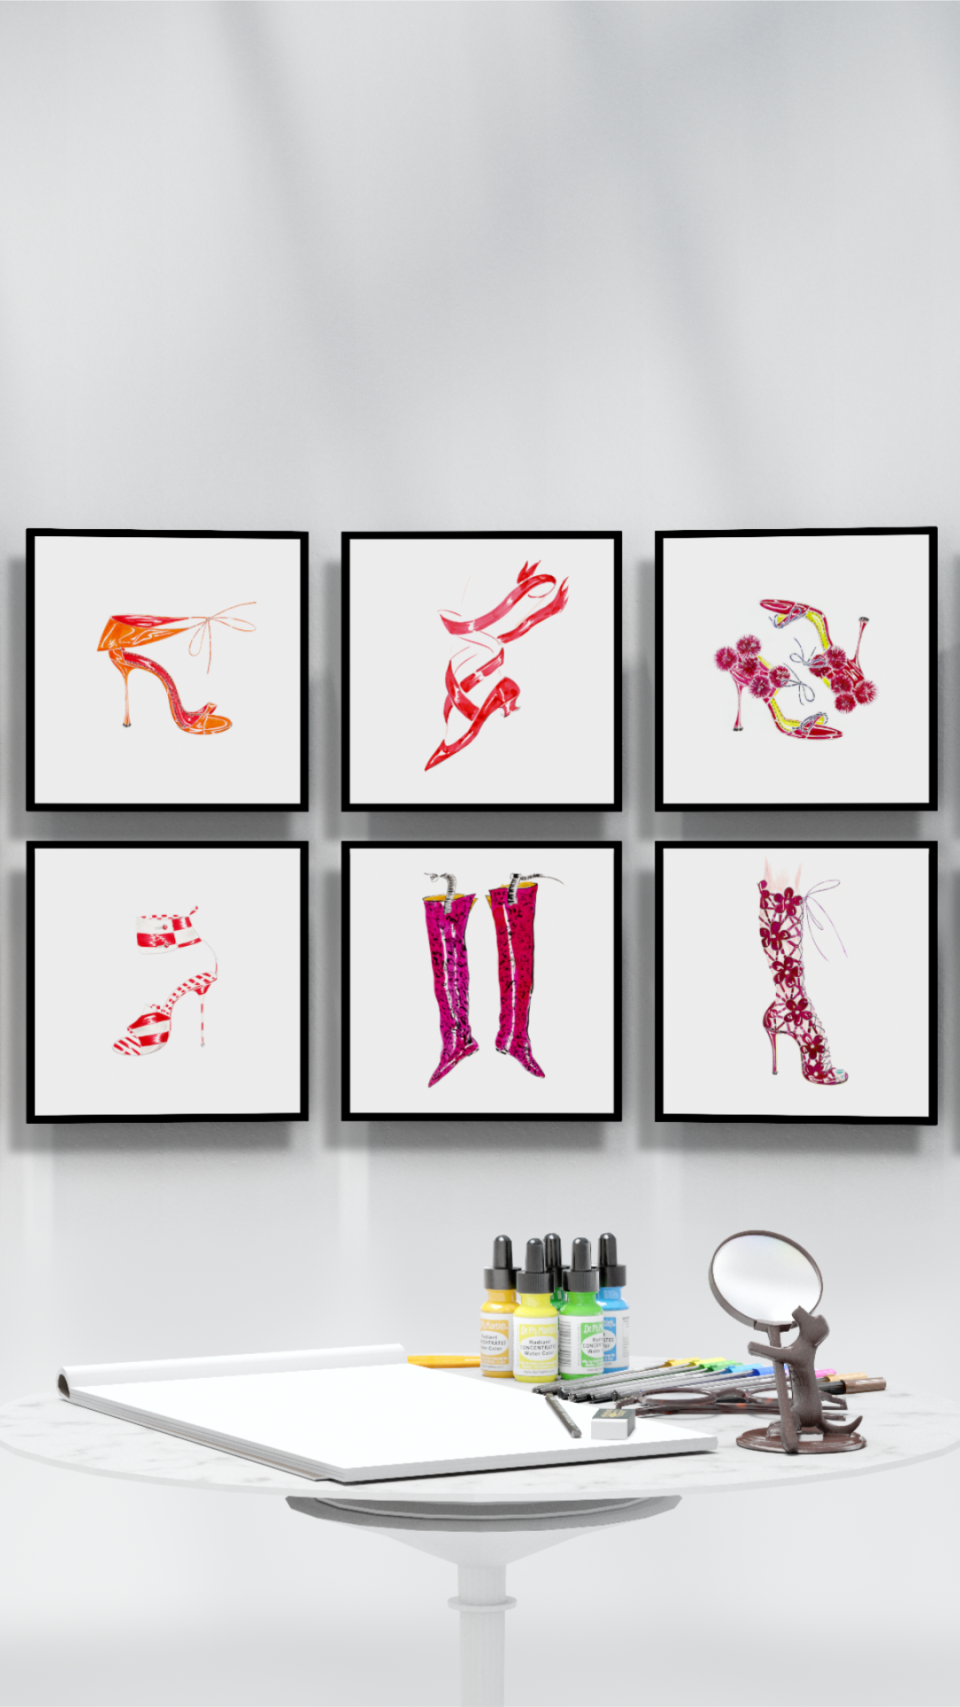 The Palette Room, part of the new Manolo Blahnik digital archive. - Credit: Courtesy image